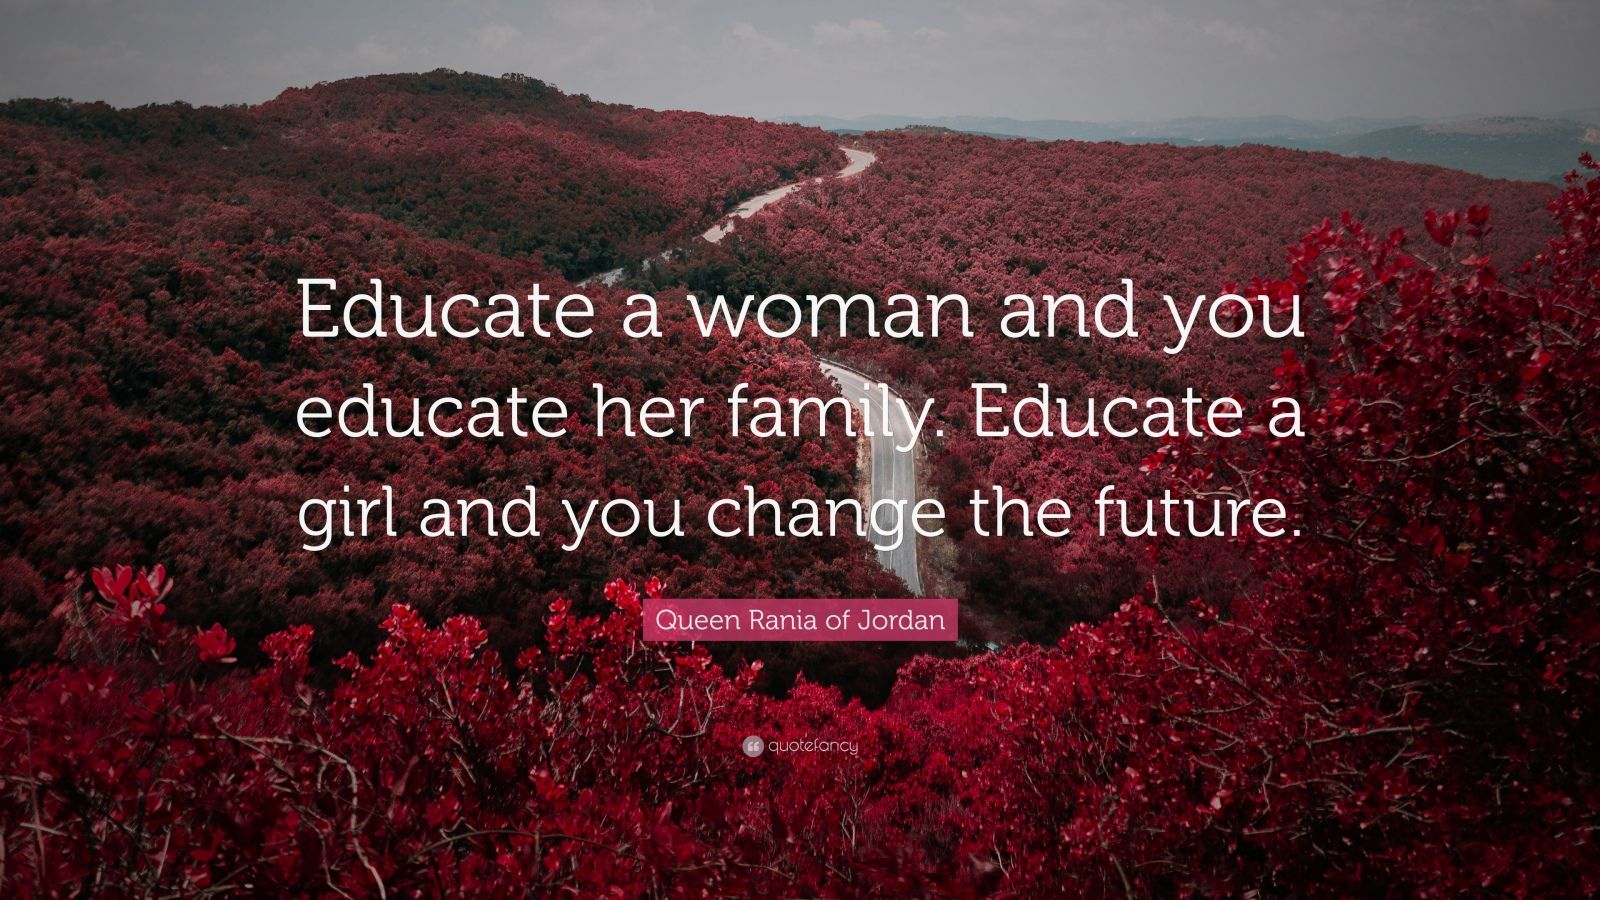 If you educate a woman you educate a family essay